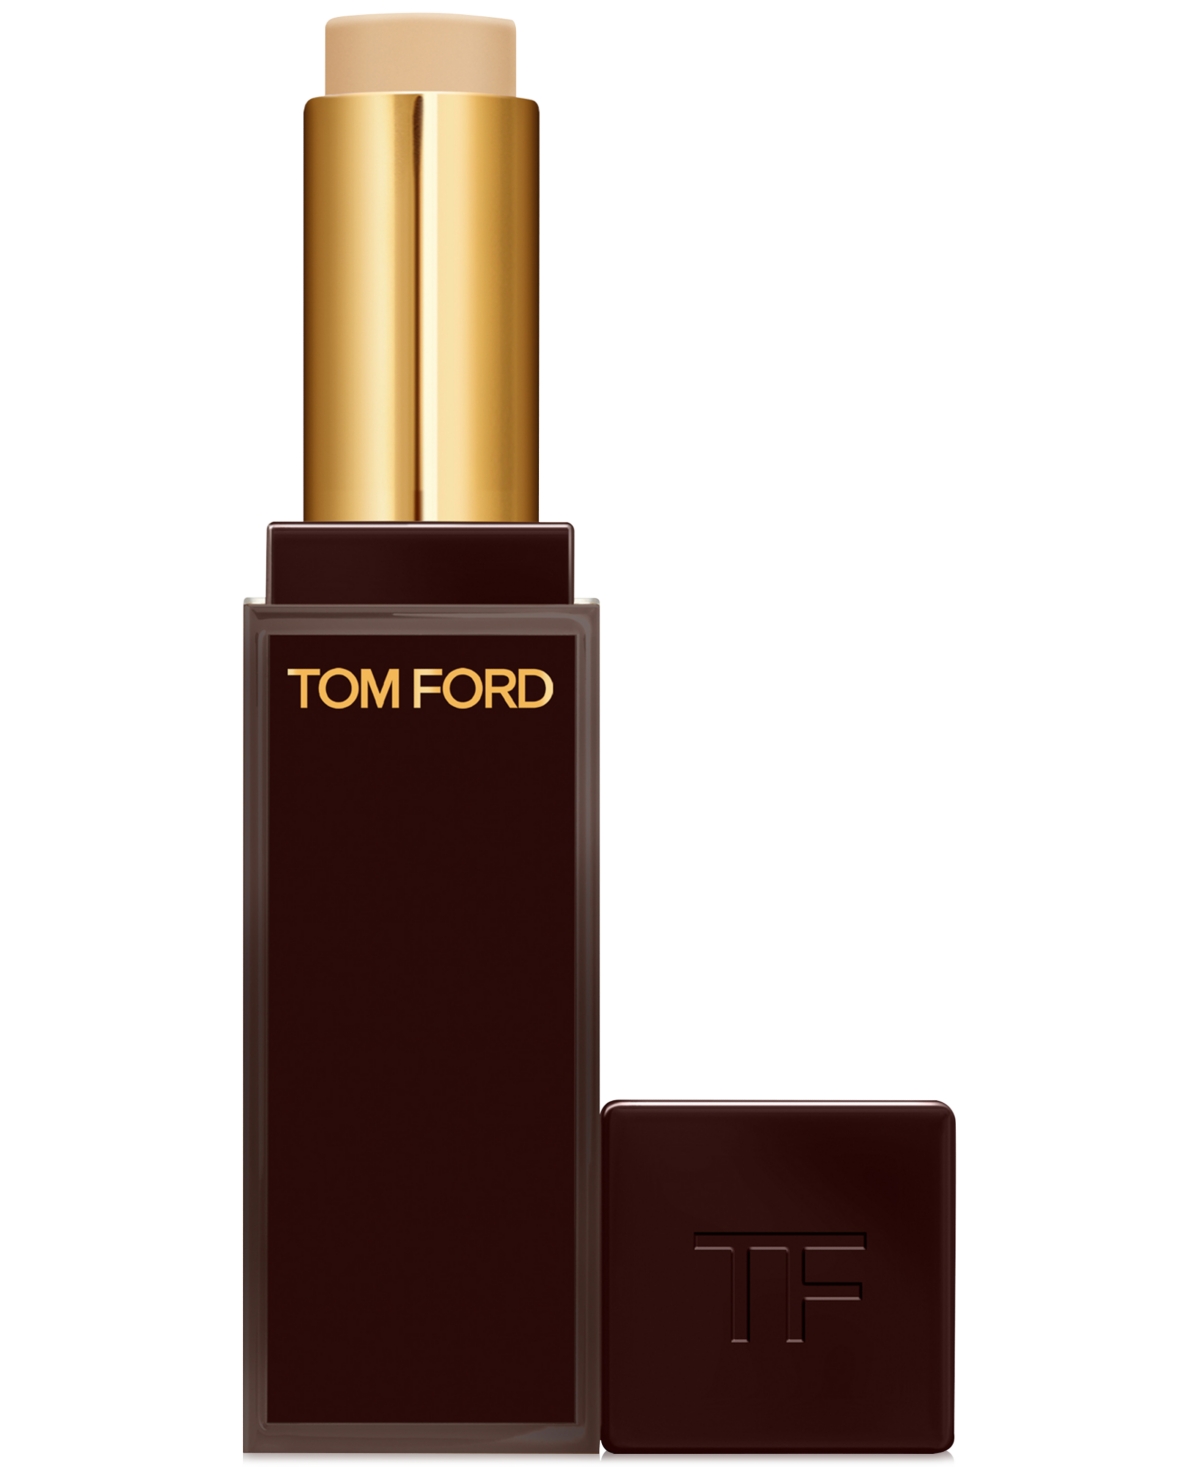 Tom Ford Traceless Soft Matte Concealer In W Taupe (light-medium Skin With Olive Un